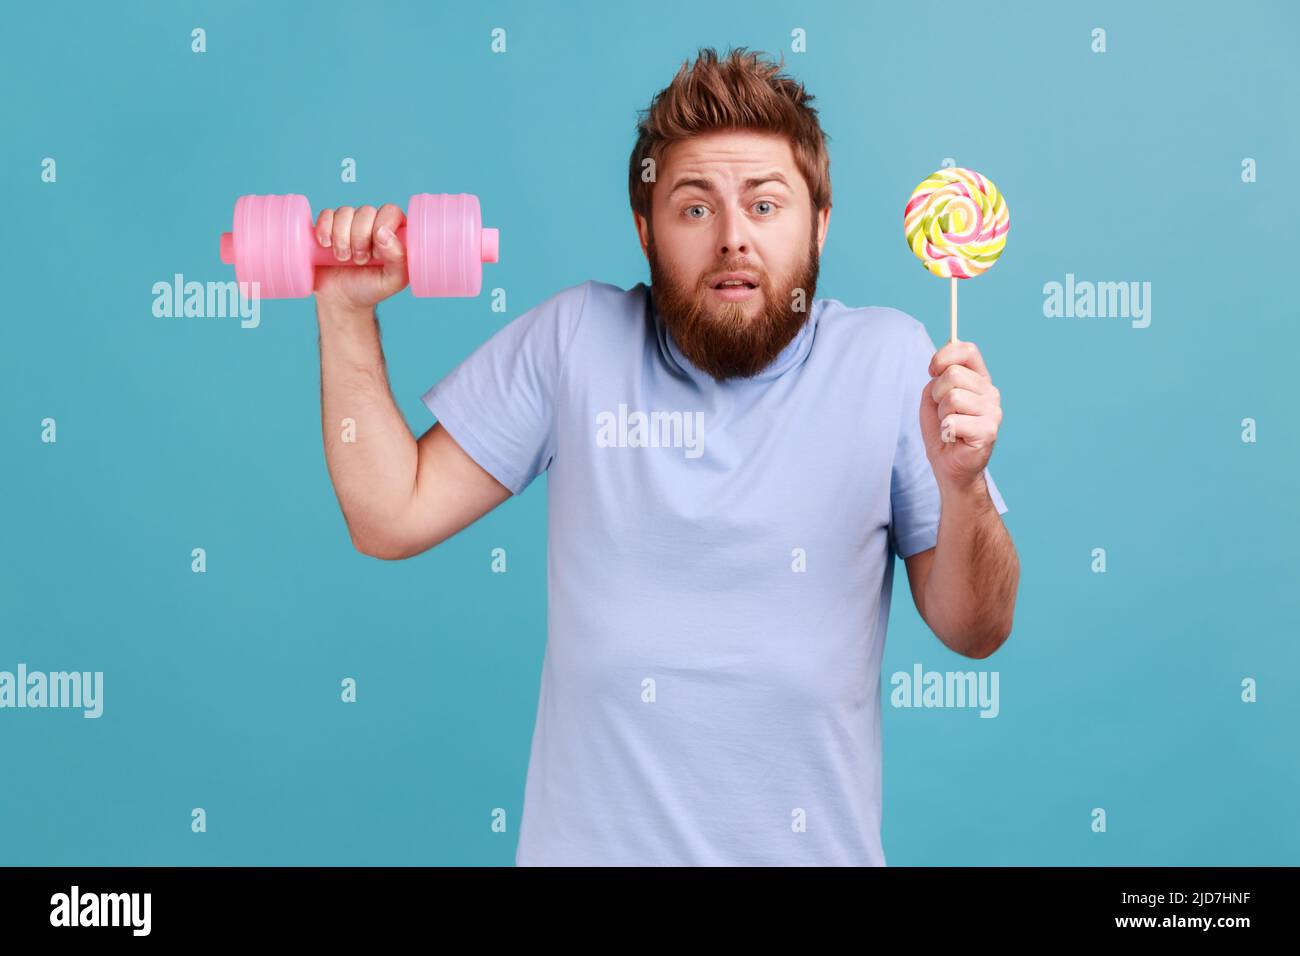 Portrait of puzzled confused handsome bearded man holding lollypop in hand and having training with pink dumbbell, shrugging shoulders. Indoor studio shot isolated on blue background. Stock Photo